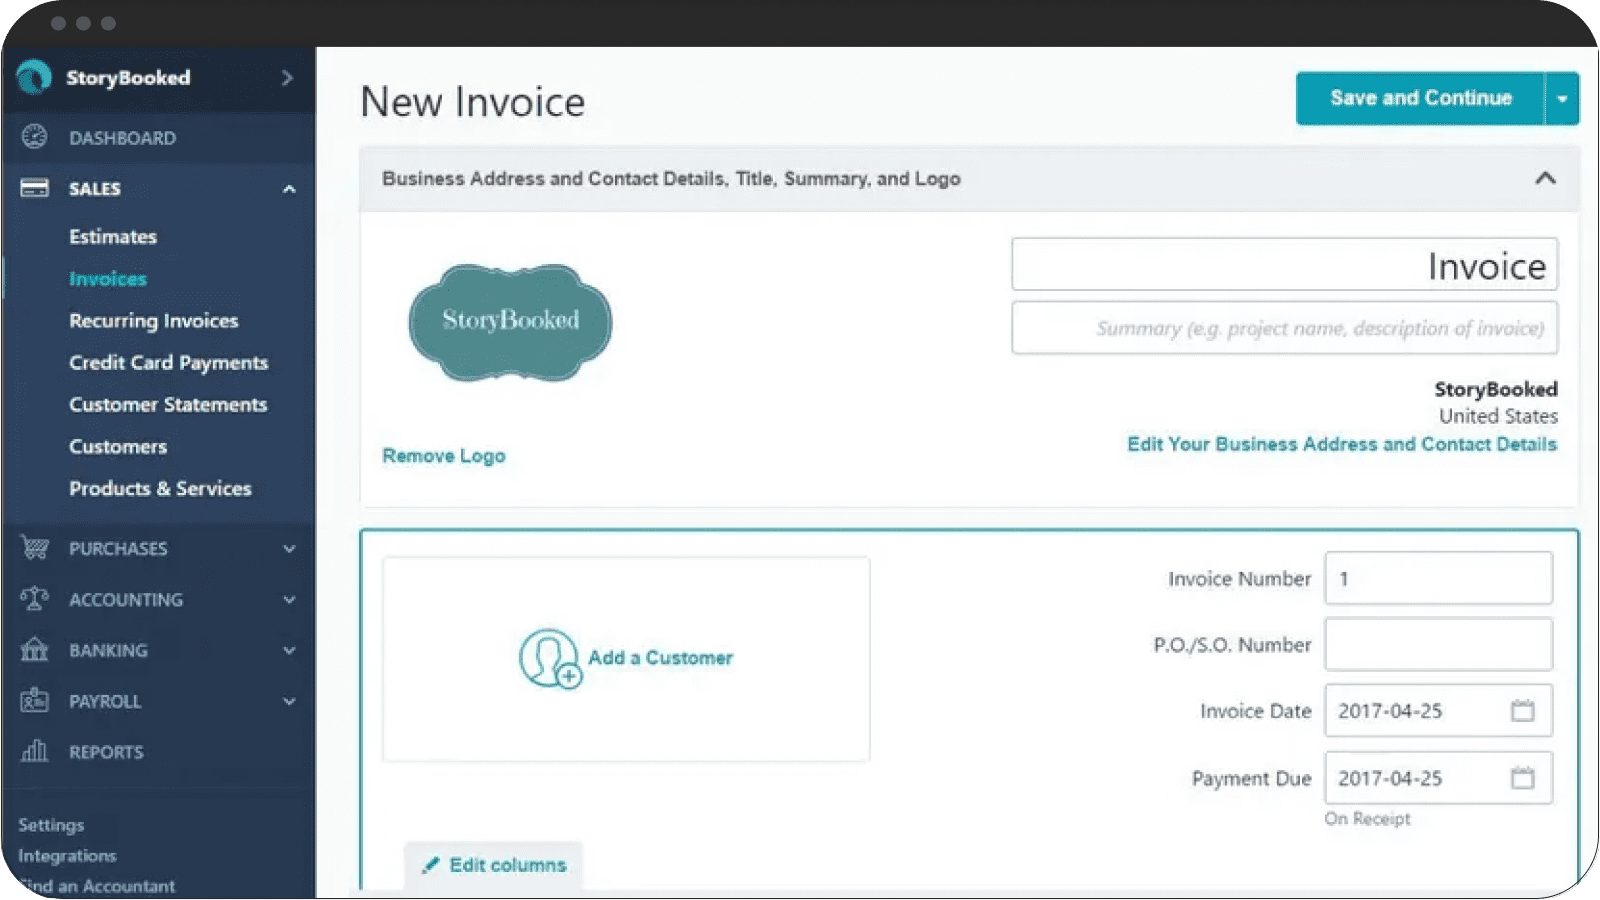 Handling invoices in an accounting platform.